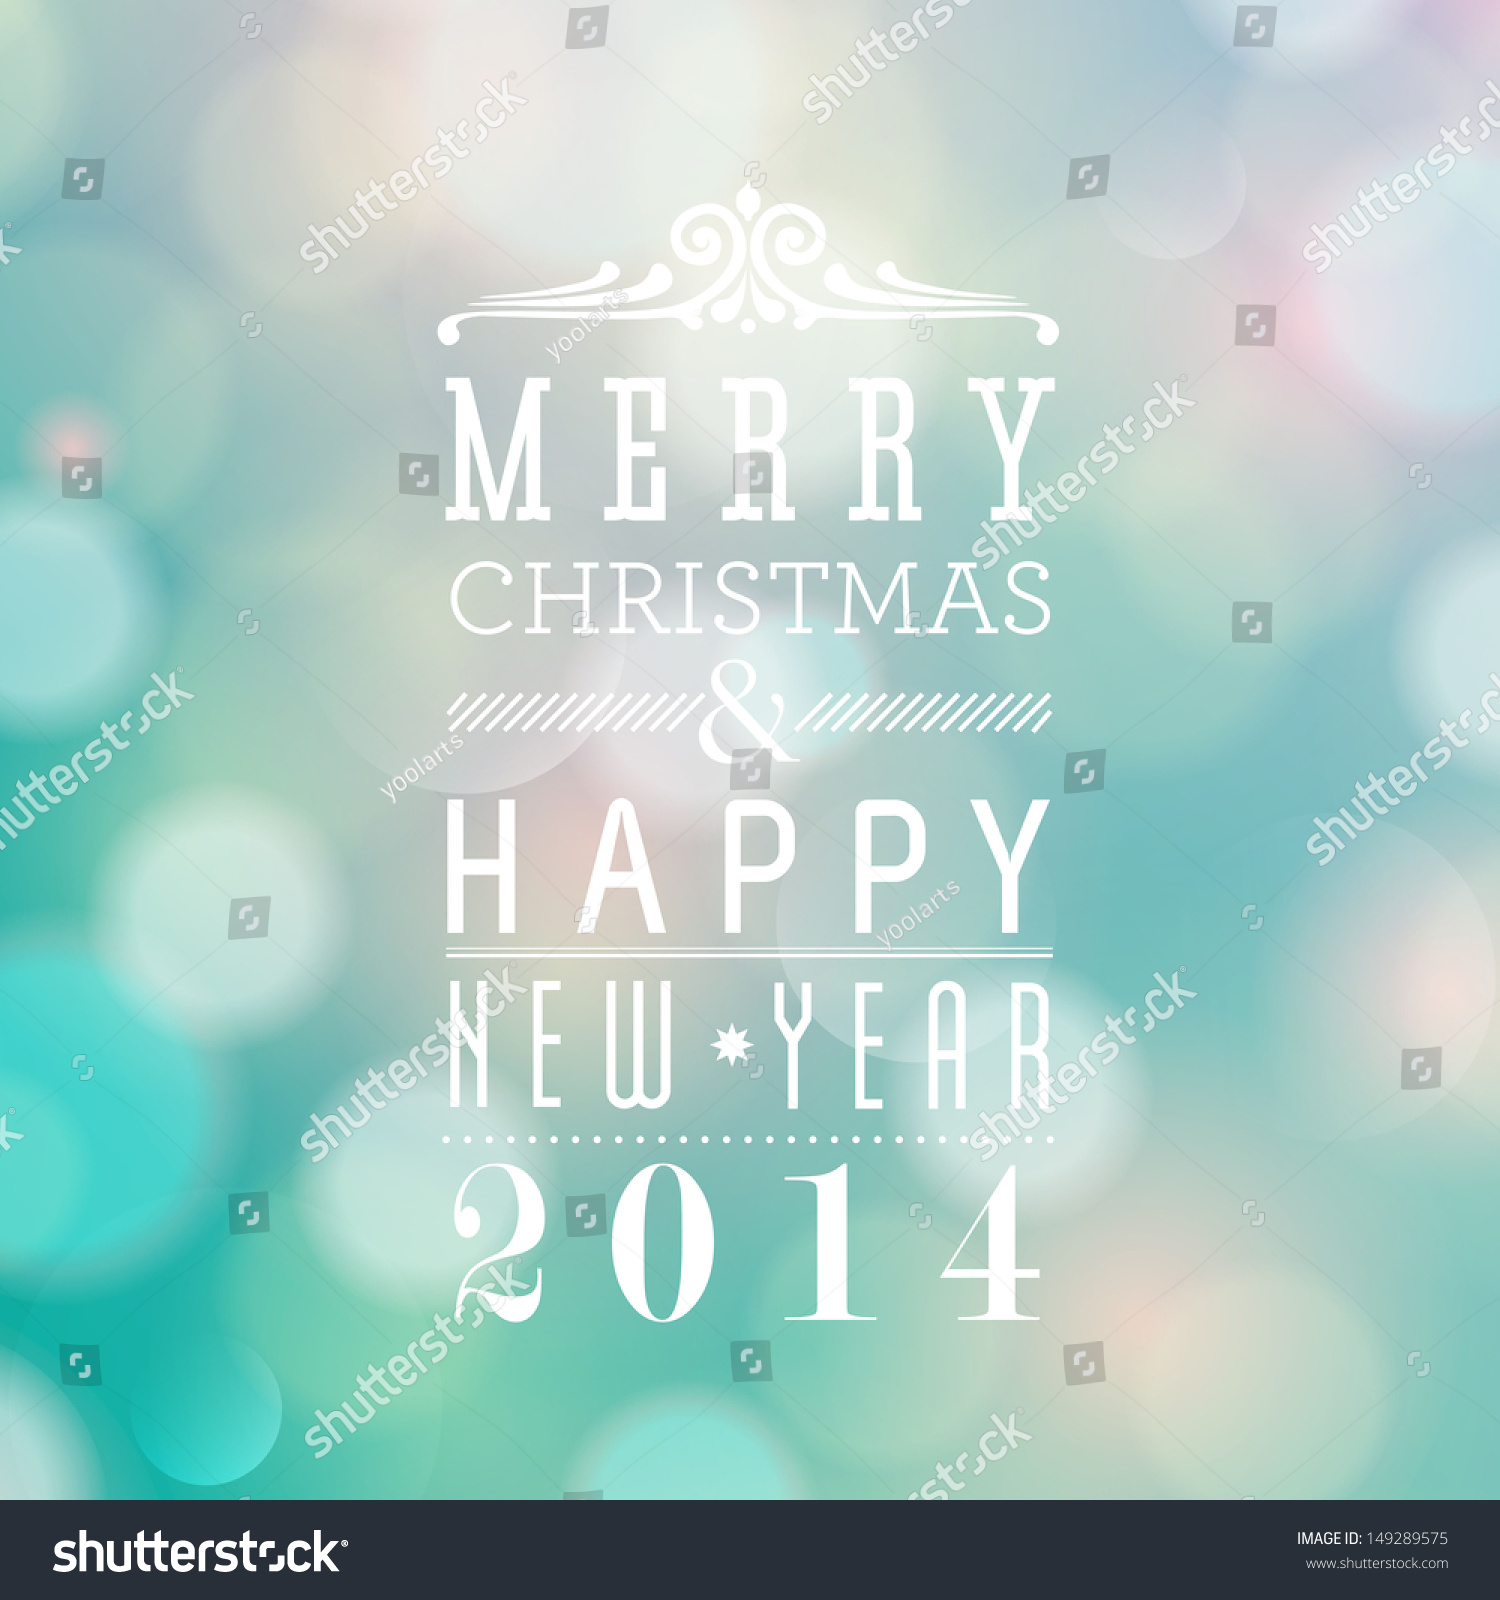 Merry Christmas And Happy New Year Card Design. Perfect As Invitation ...